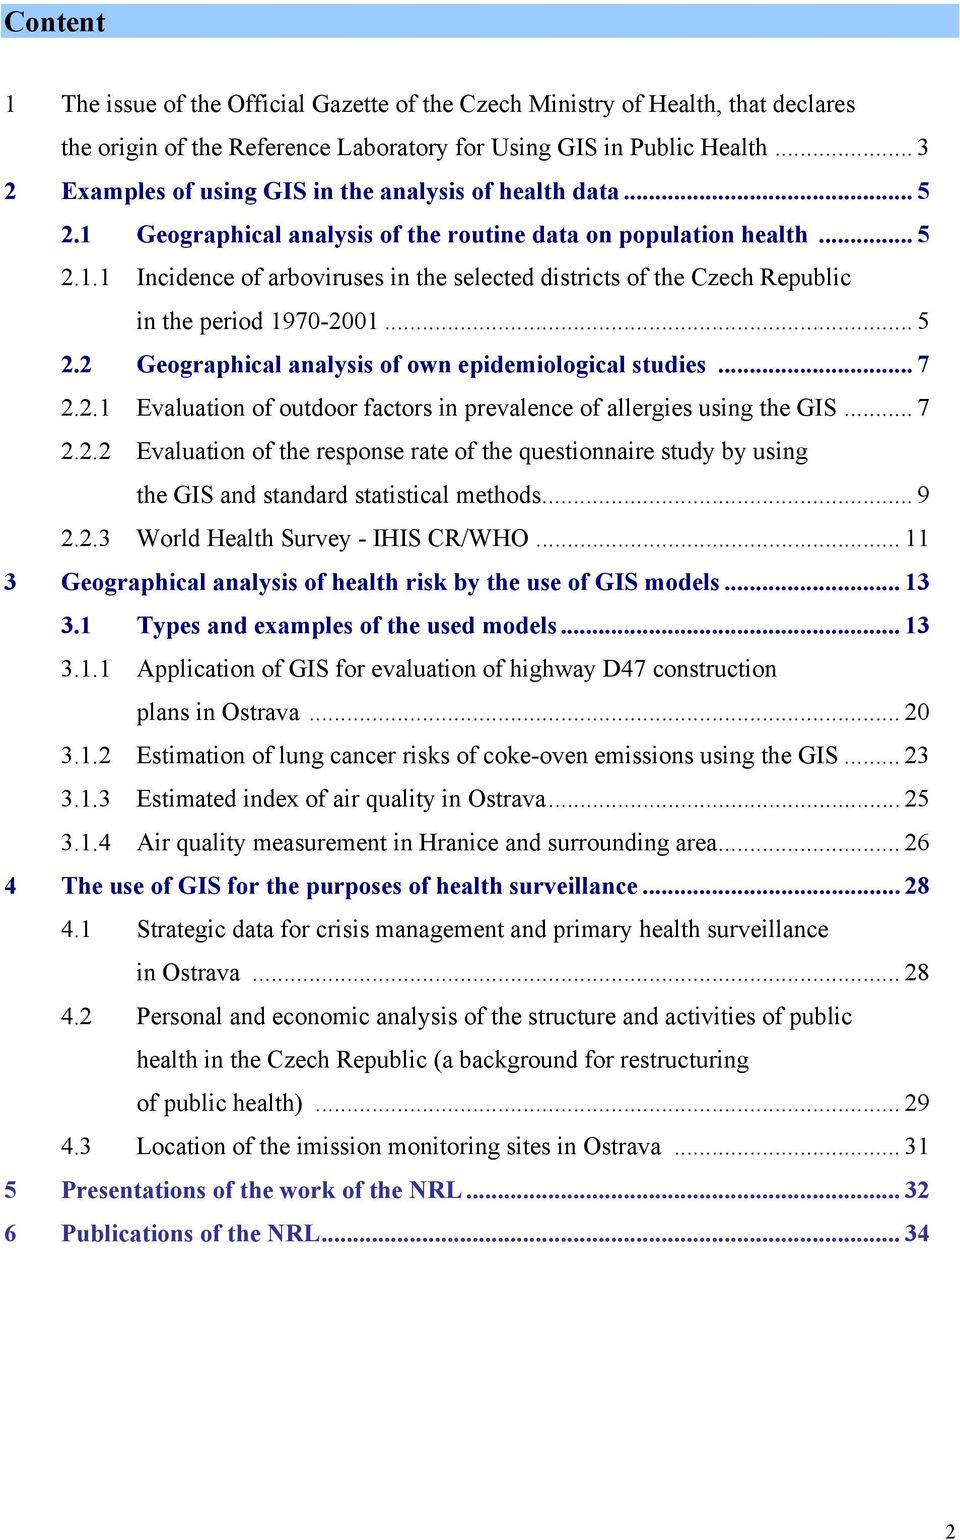 .. 5 2.2 Geographical analysis of own epidemiological studies... 7 2.2.1 Evaluation of outdoor factors in prevalence of allergies using the GIS... 7 2.2.2 Evaluation of the response rate of the questionnaire study by using the GIS and standard statistical methods.